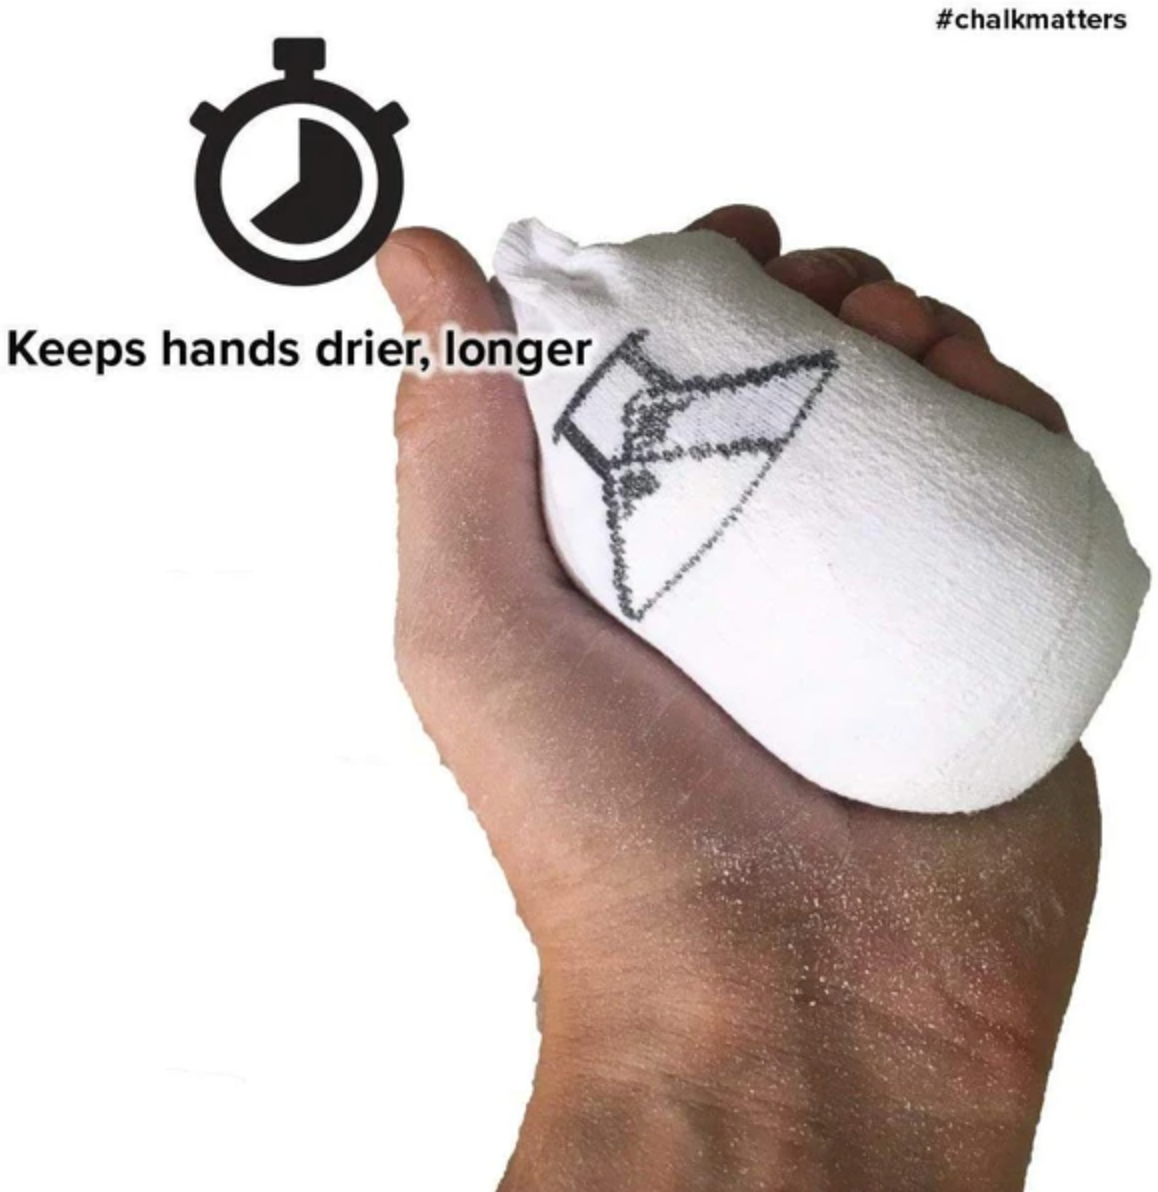 friction labs chalk bag in hand with description "keeps hands drier, longer"